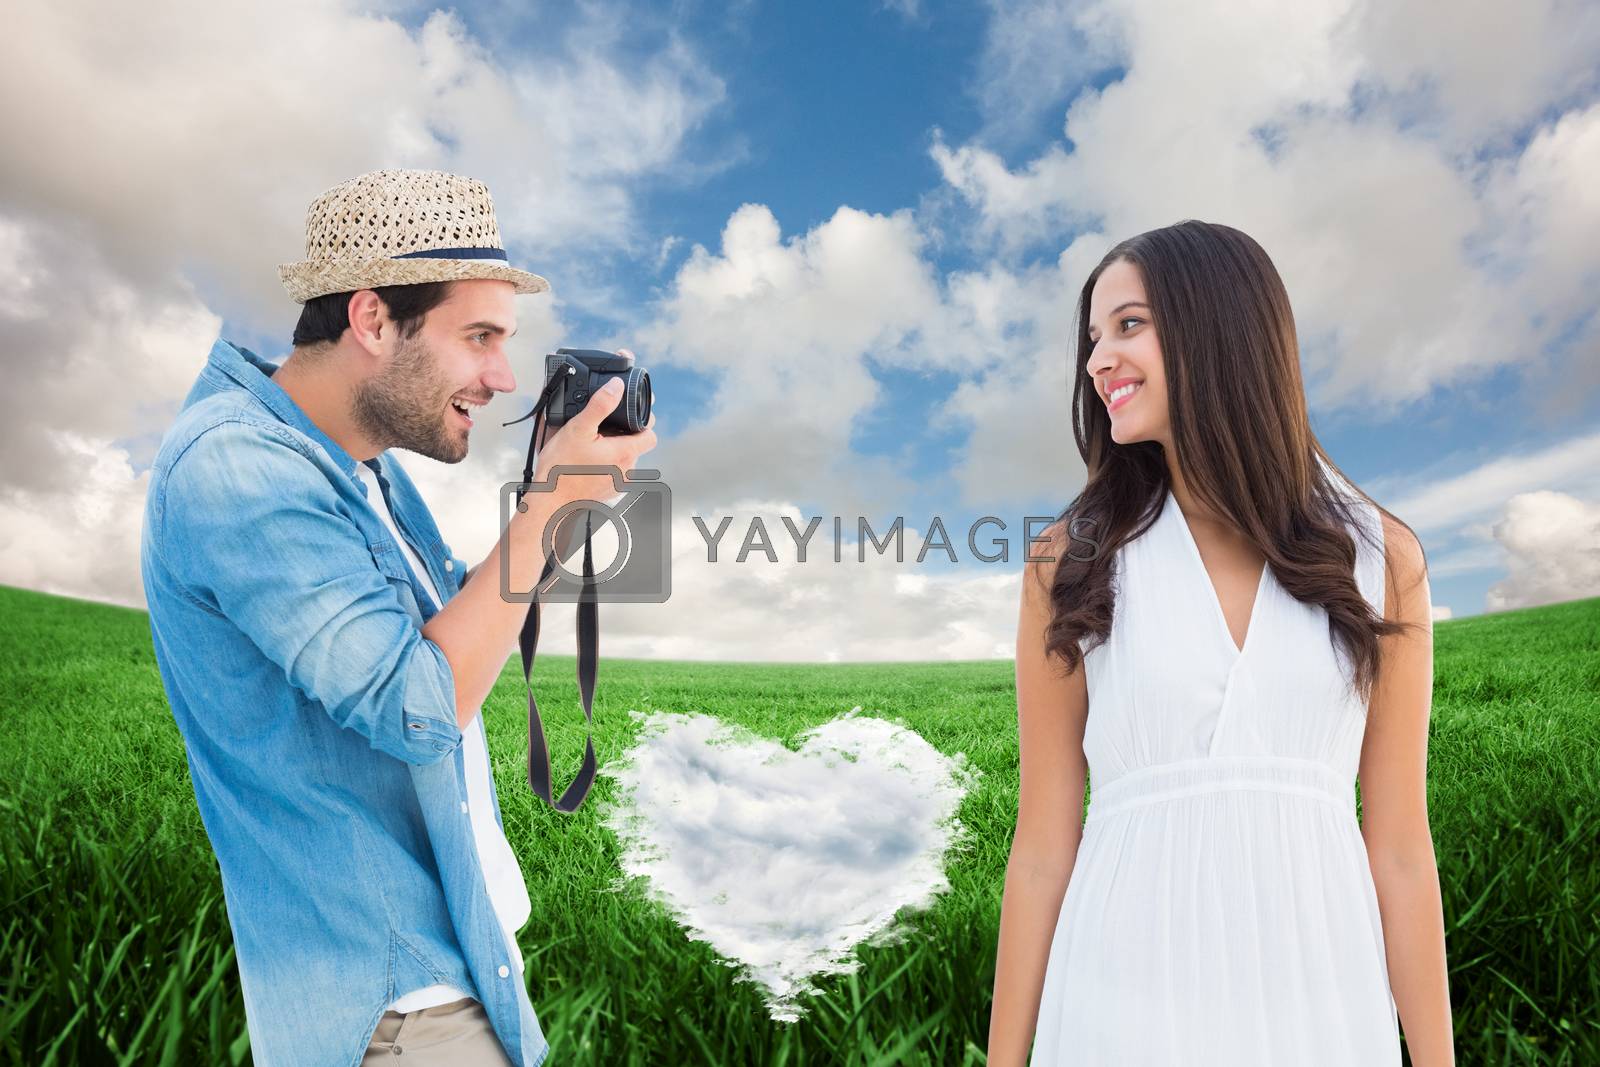 Royalty free image of Composite image of handsome hipster taking a photo of pretty girlfriend by Wavebreakmedia